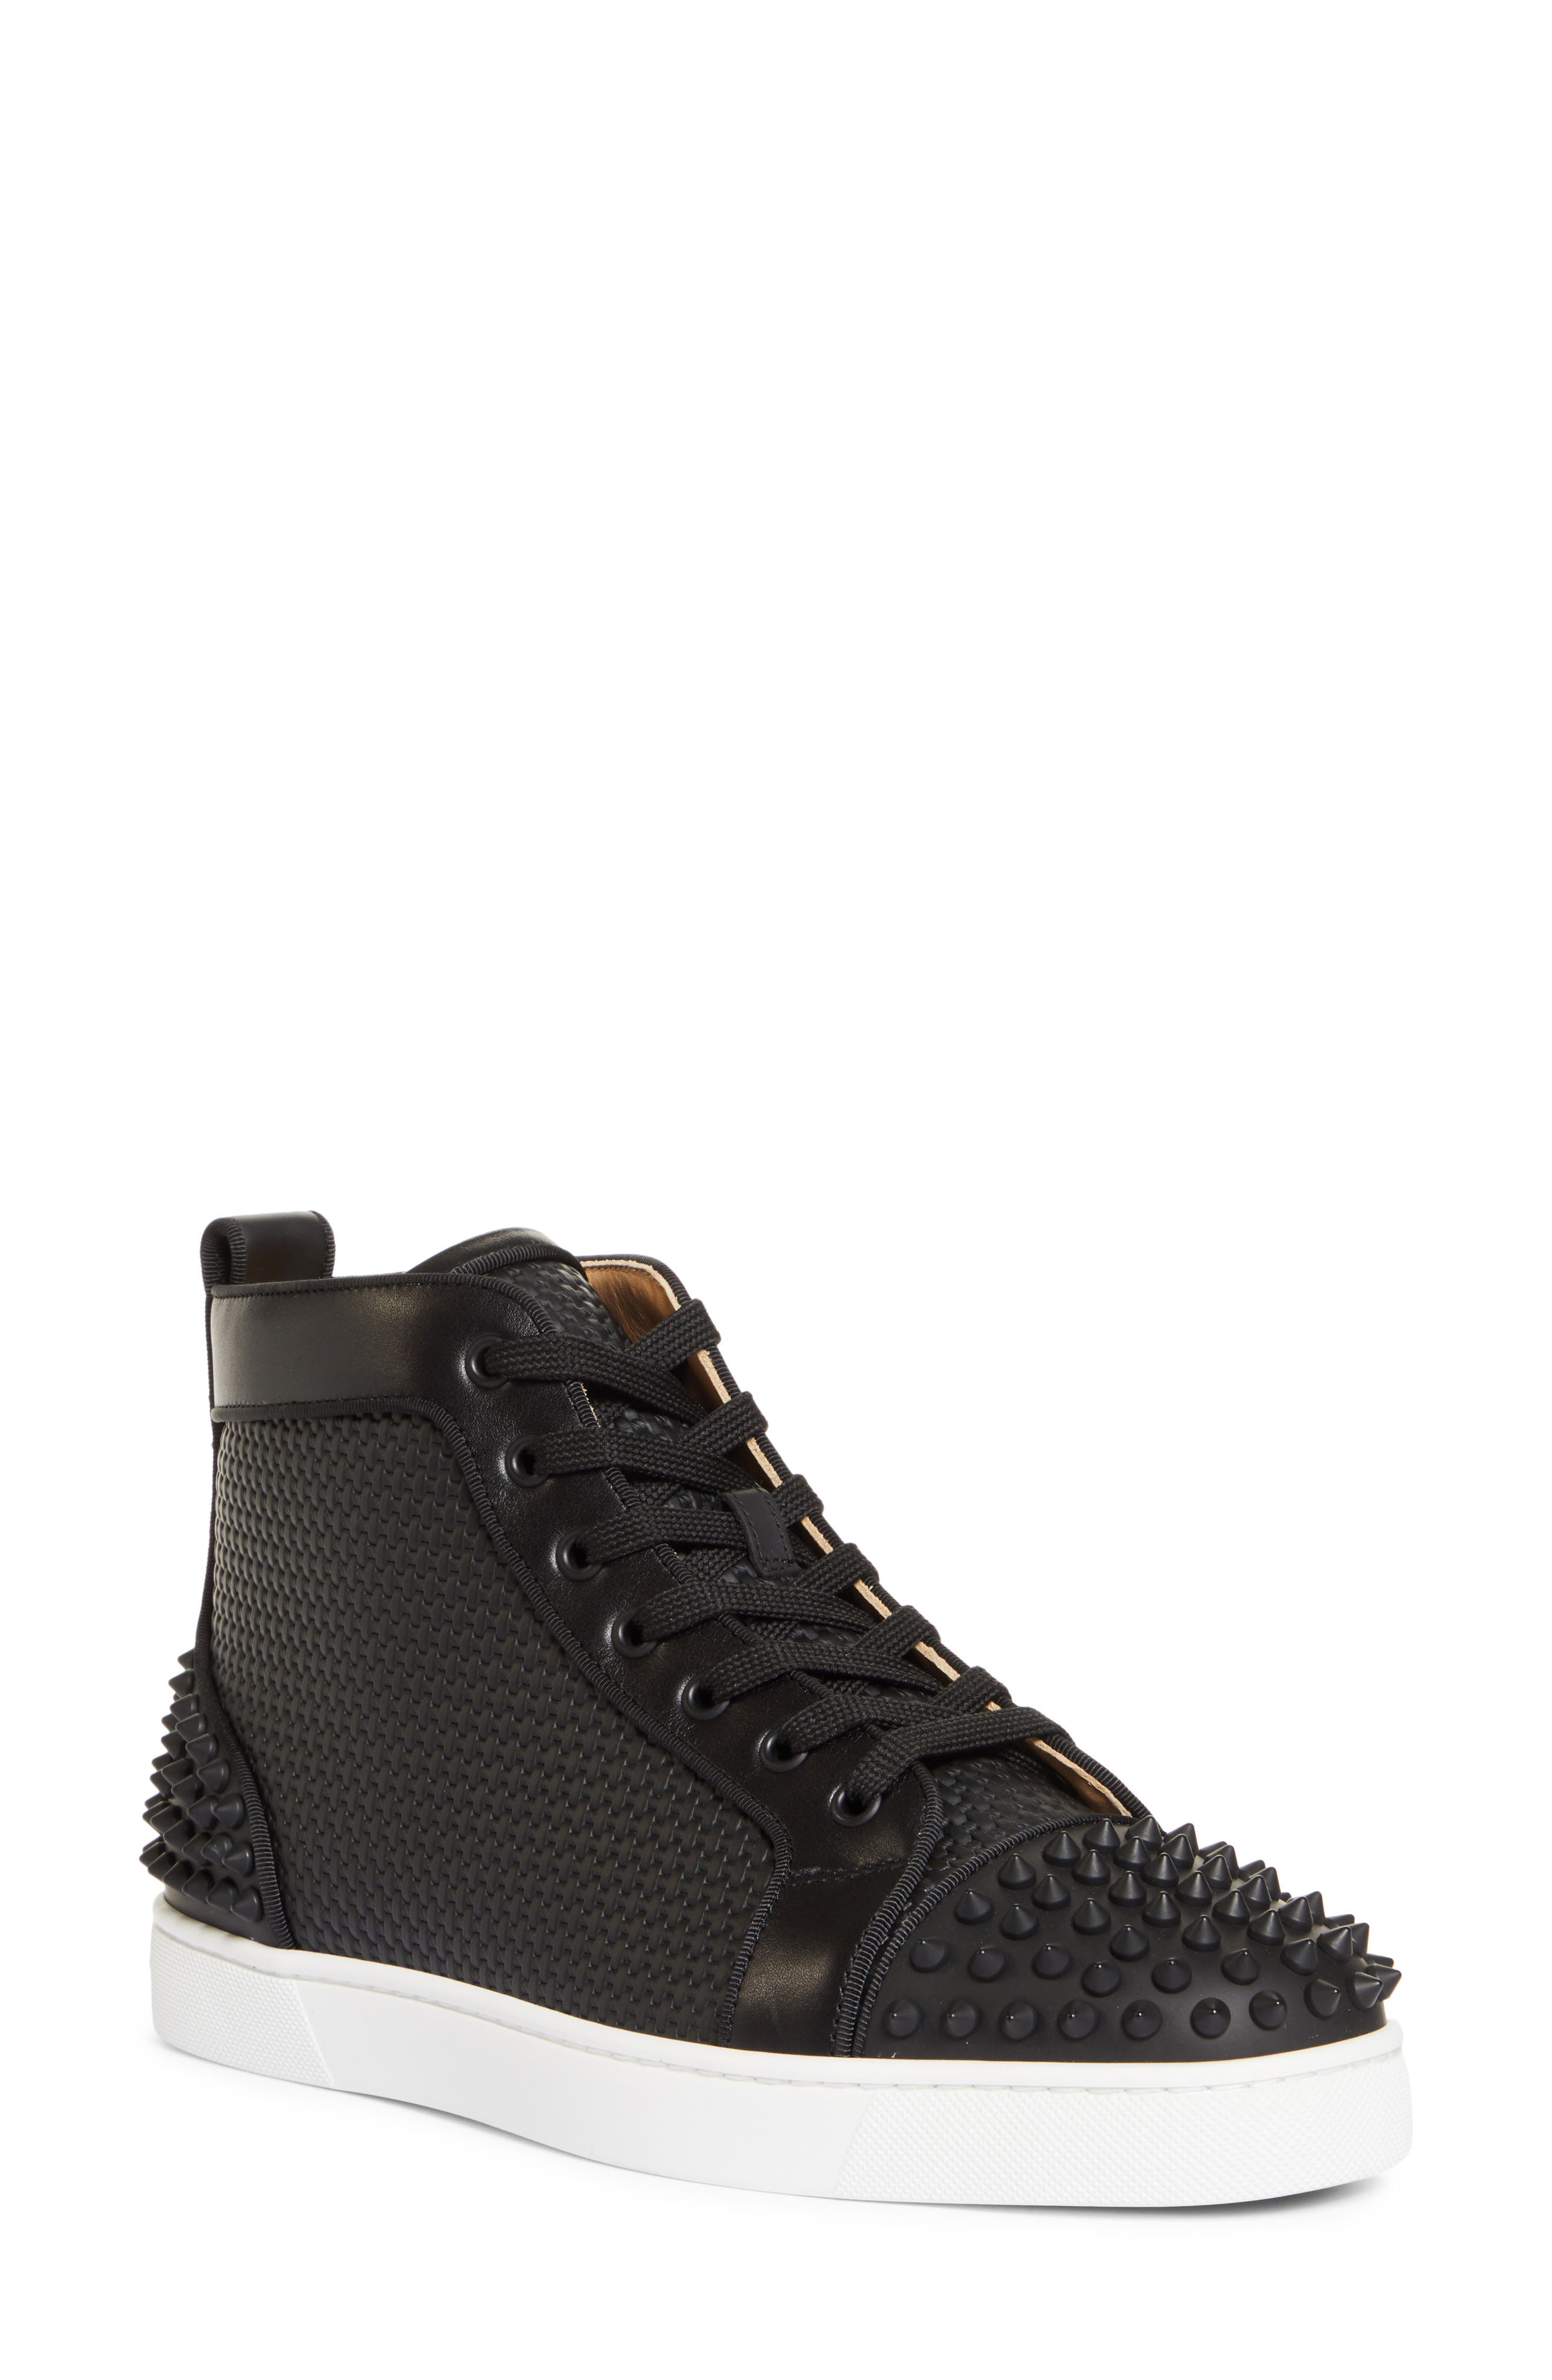 Christian Louboutin Lou Spikes High Top Sneaker in Black/Black Mat at Nordstrom, Size 8Us